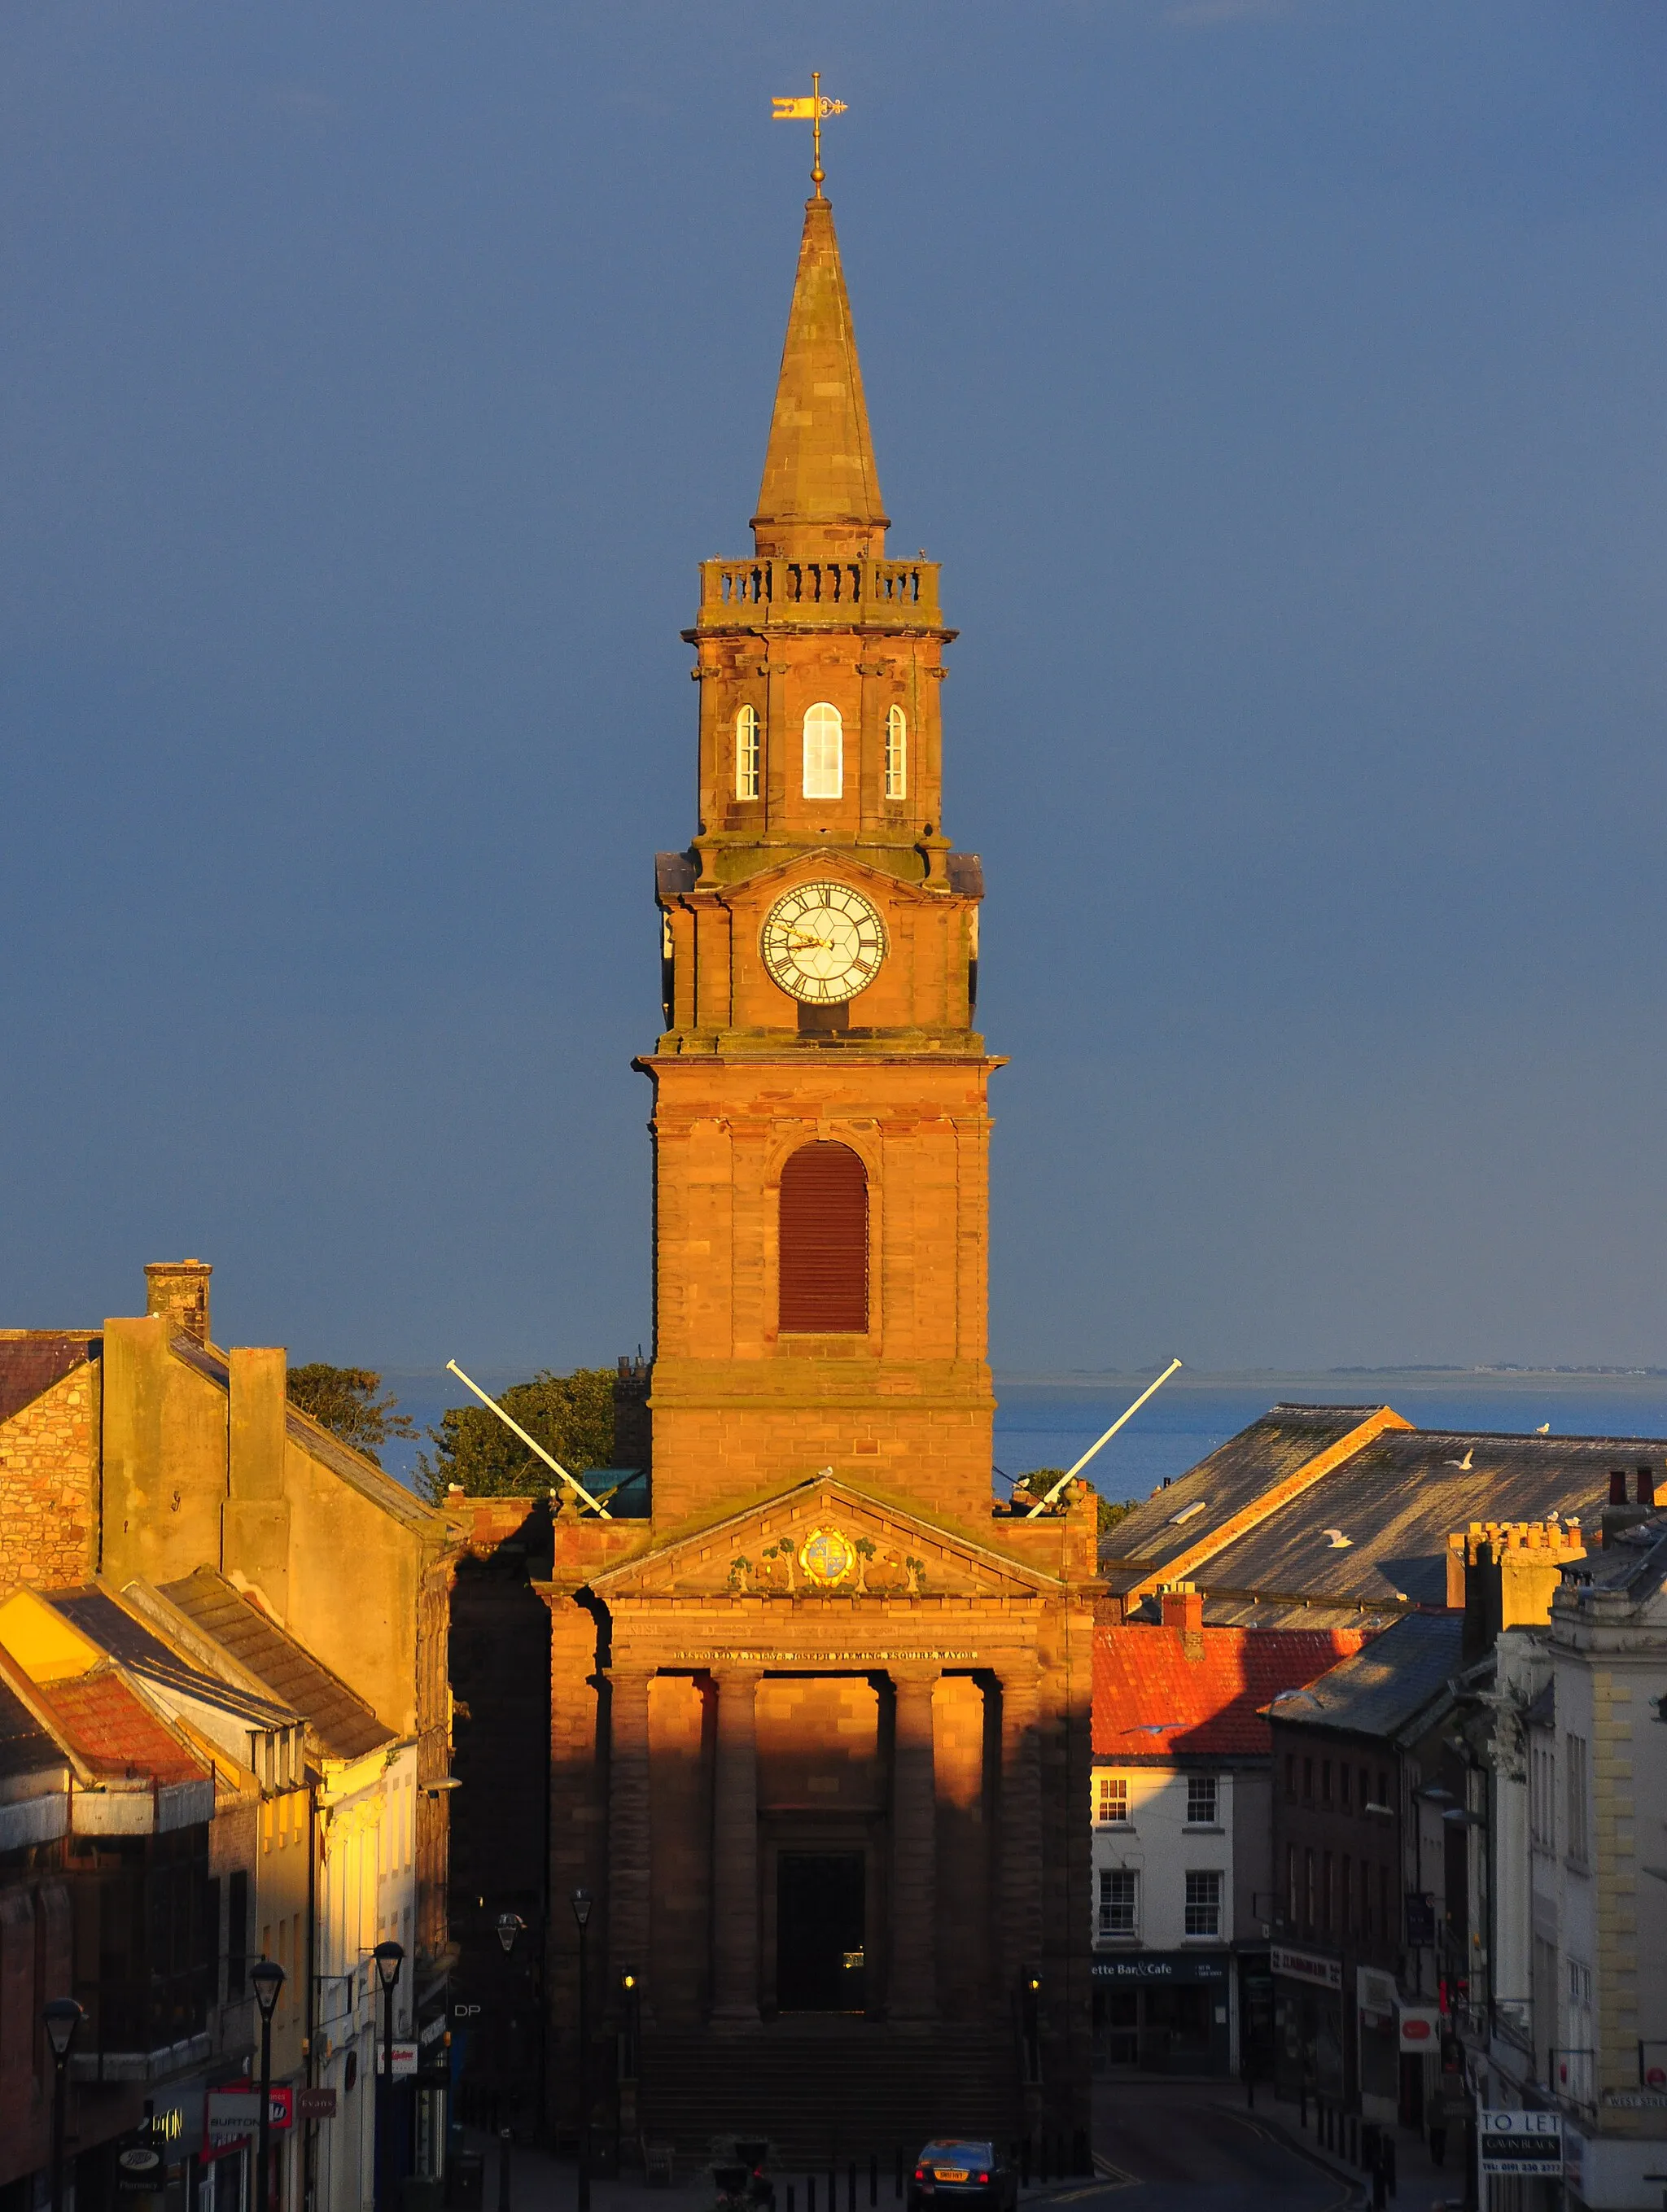 Photo showing: The town hall of Berwick-upon-Tweed, Northumberland. The tower is catching the sunset light, while the building itself is mostly in the shade.